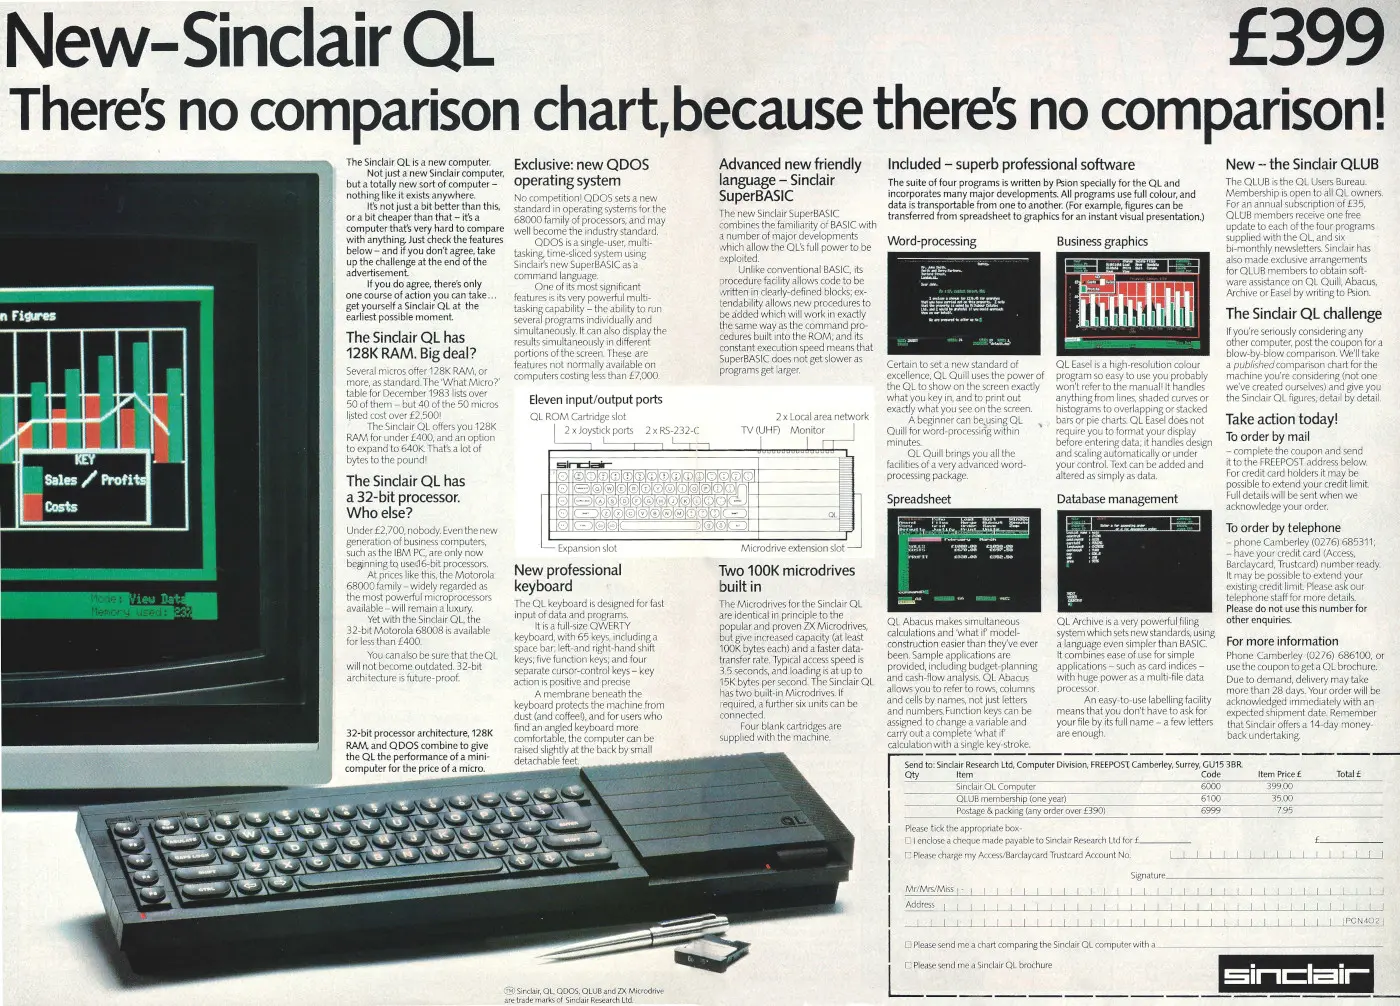 Sinclair Advert: The New Sinclair QL - There's no comparison chart because there's no comparison!, from Your Computer, June 1984